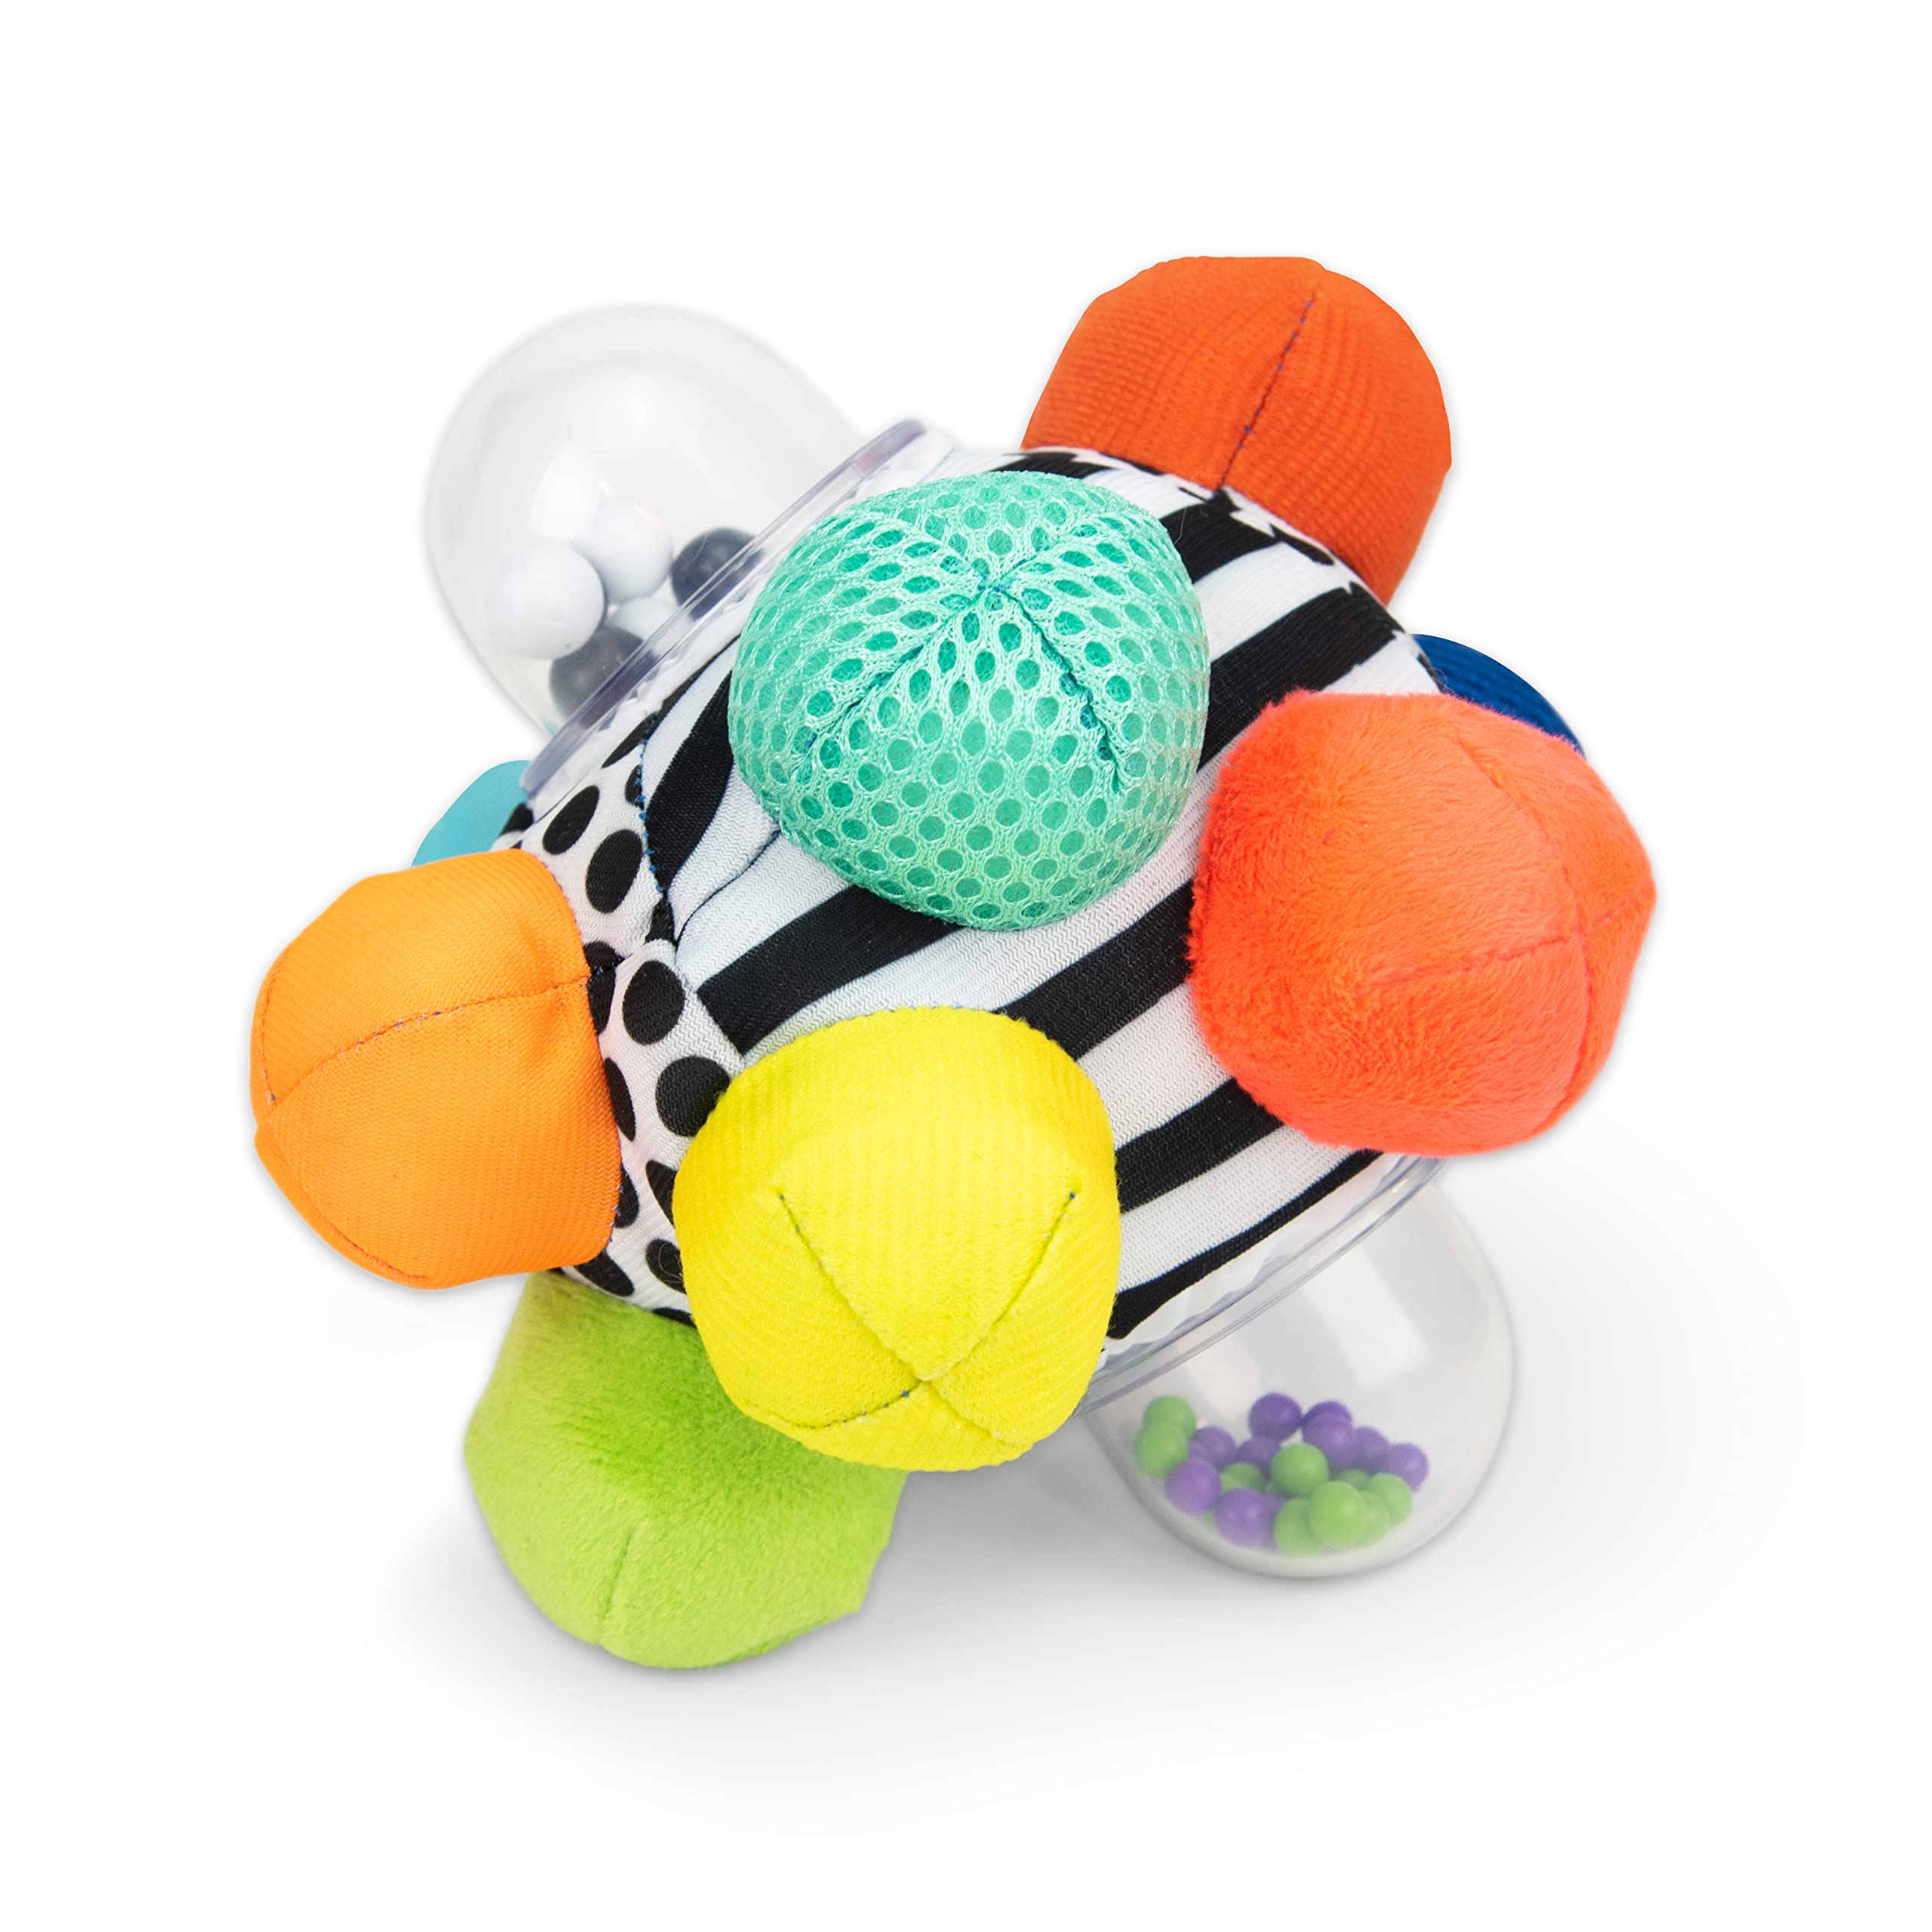 Developmental Bumpy Ball | Easy to Grasp Bumps Help Develop Motor S##### | for Ages 6 Months and Up | Colors May Vary